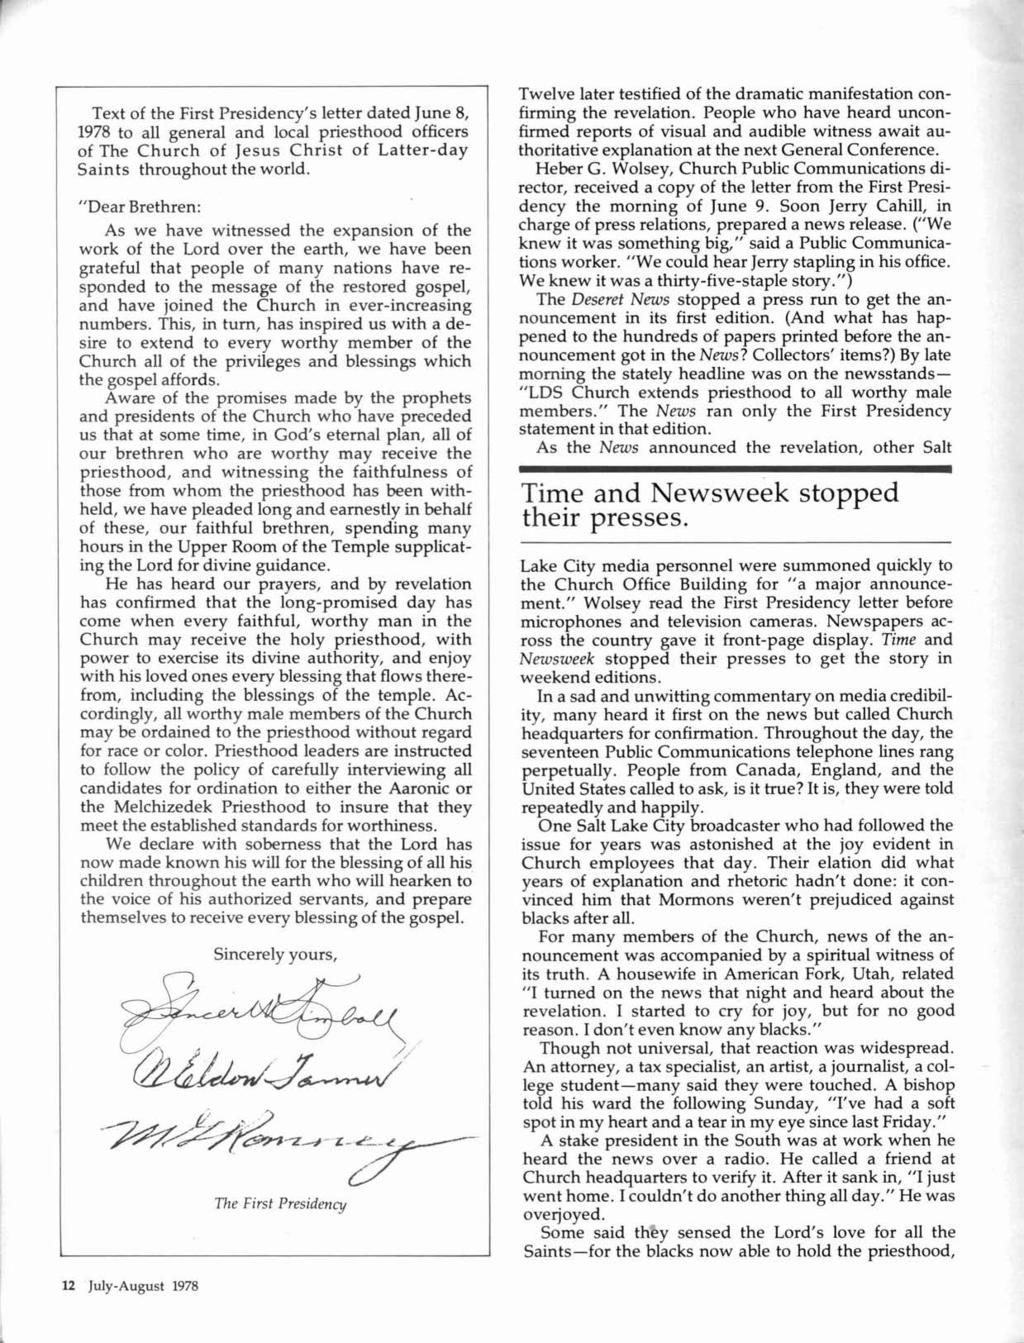 Text of the First Presidency's letter dated June 8, 1978 to all general and local priesthood officers of The Church of Jesus Christ of Latter-day Saints throughout the world.